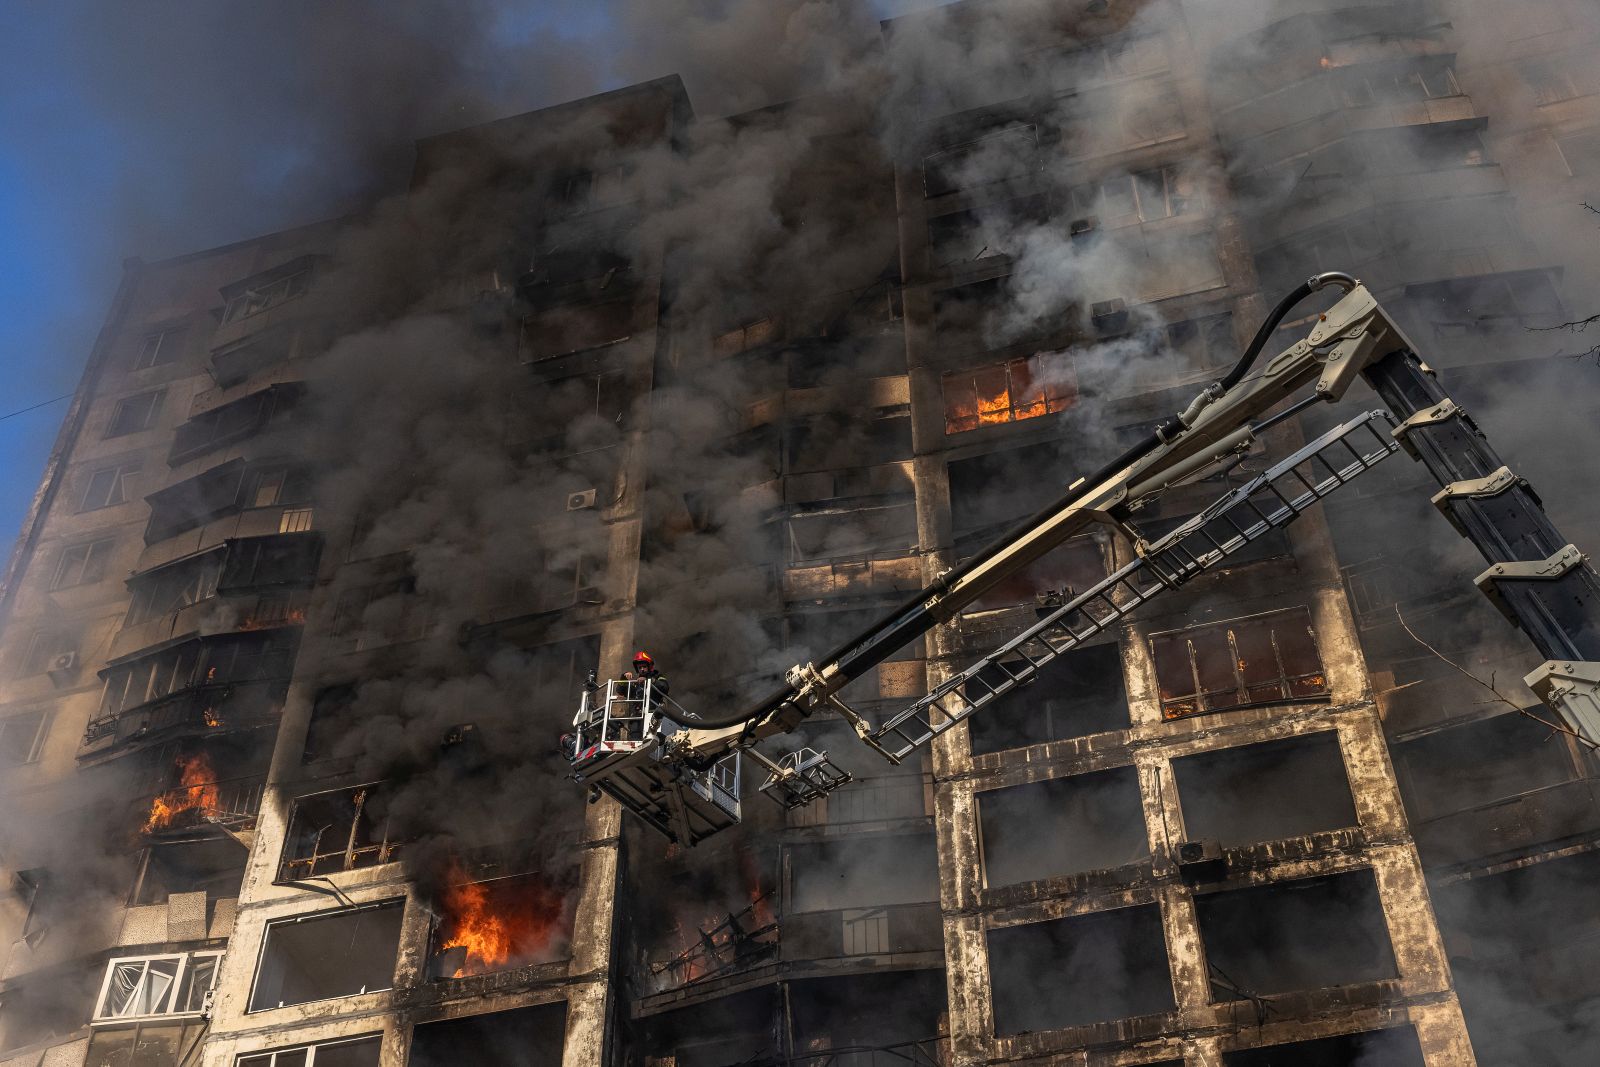 epa09825999 A firefighter extinguishes the fire in a residential building which was hit by artillery shelling, in Kyiv, Ukraine, 15 March 2022. Russian troops entered Ukraine on 24 February prompting the country's president to declare martial law and triggering a series of announcements by Western countries to impose severe economic sanctions on Russia.  EPA/ROMAN PILIPEY